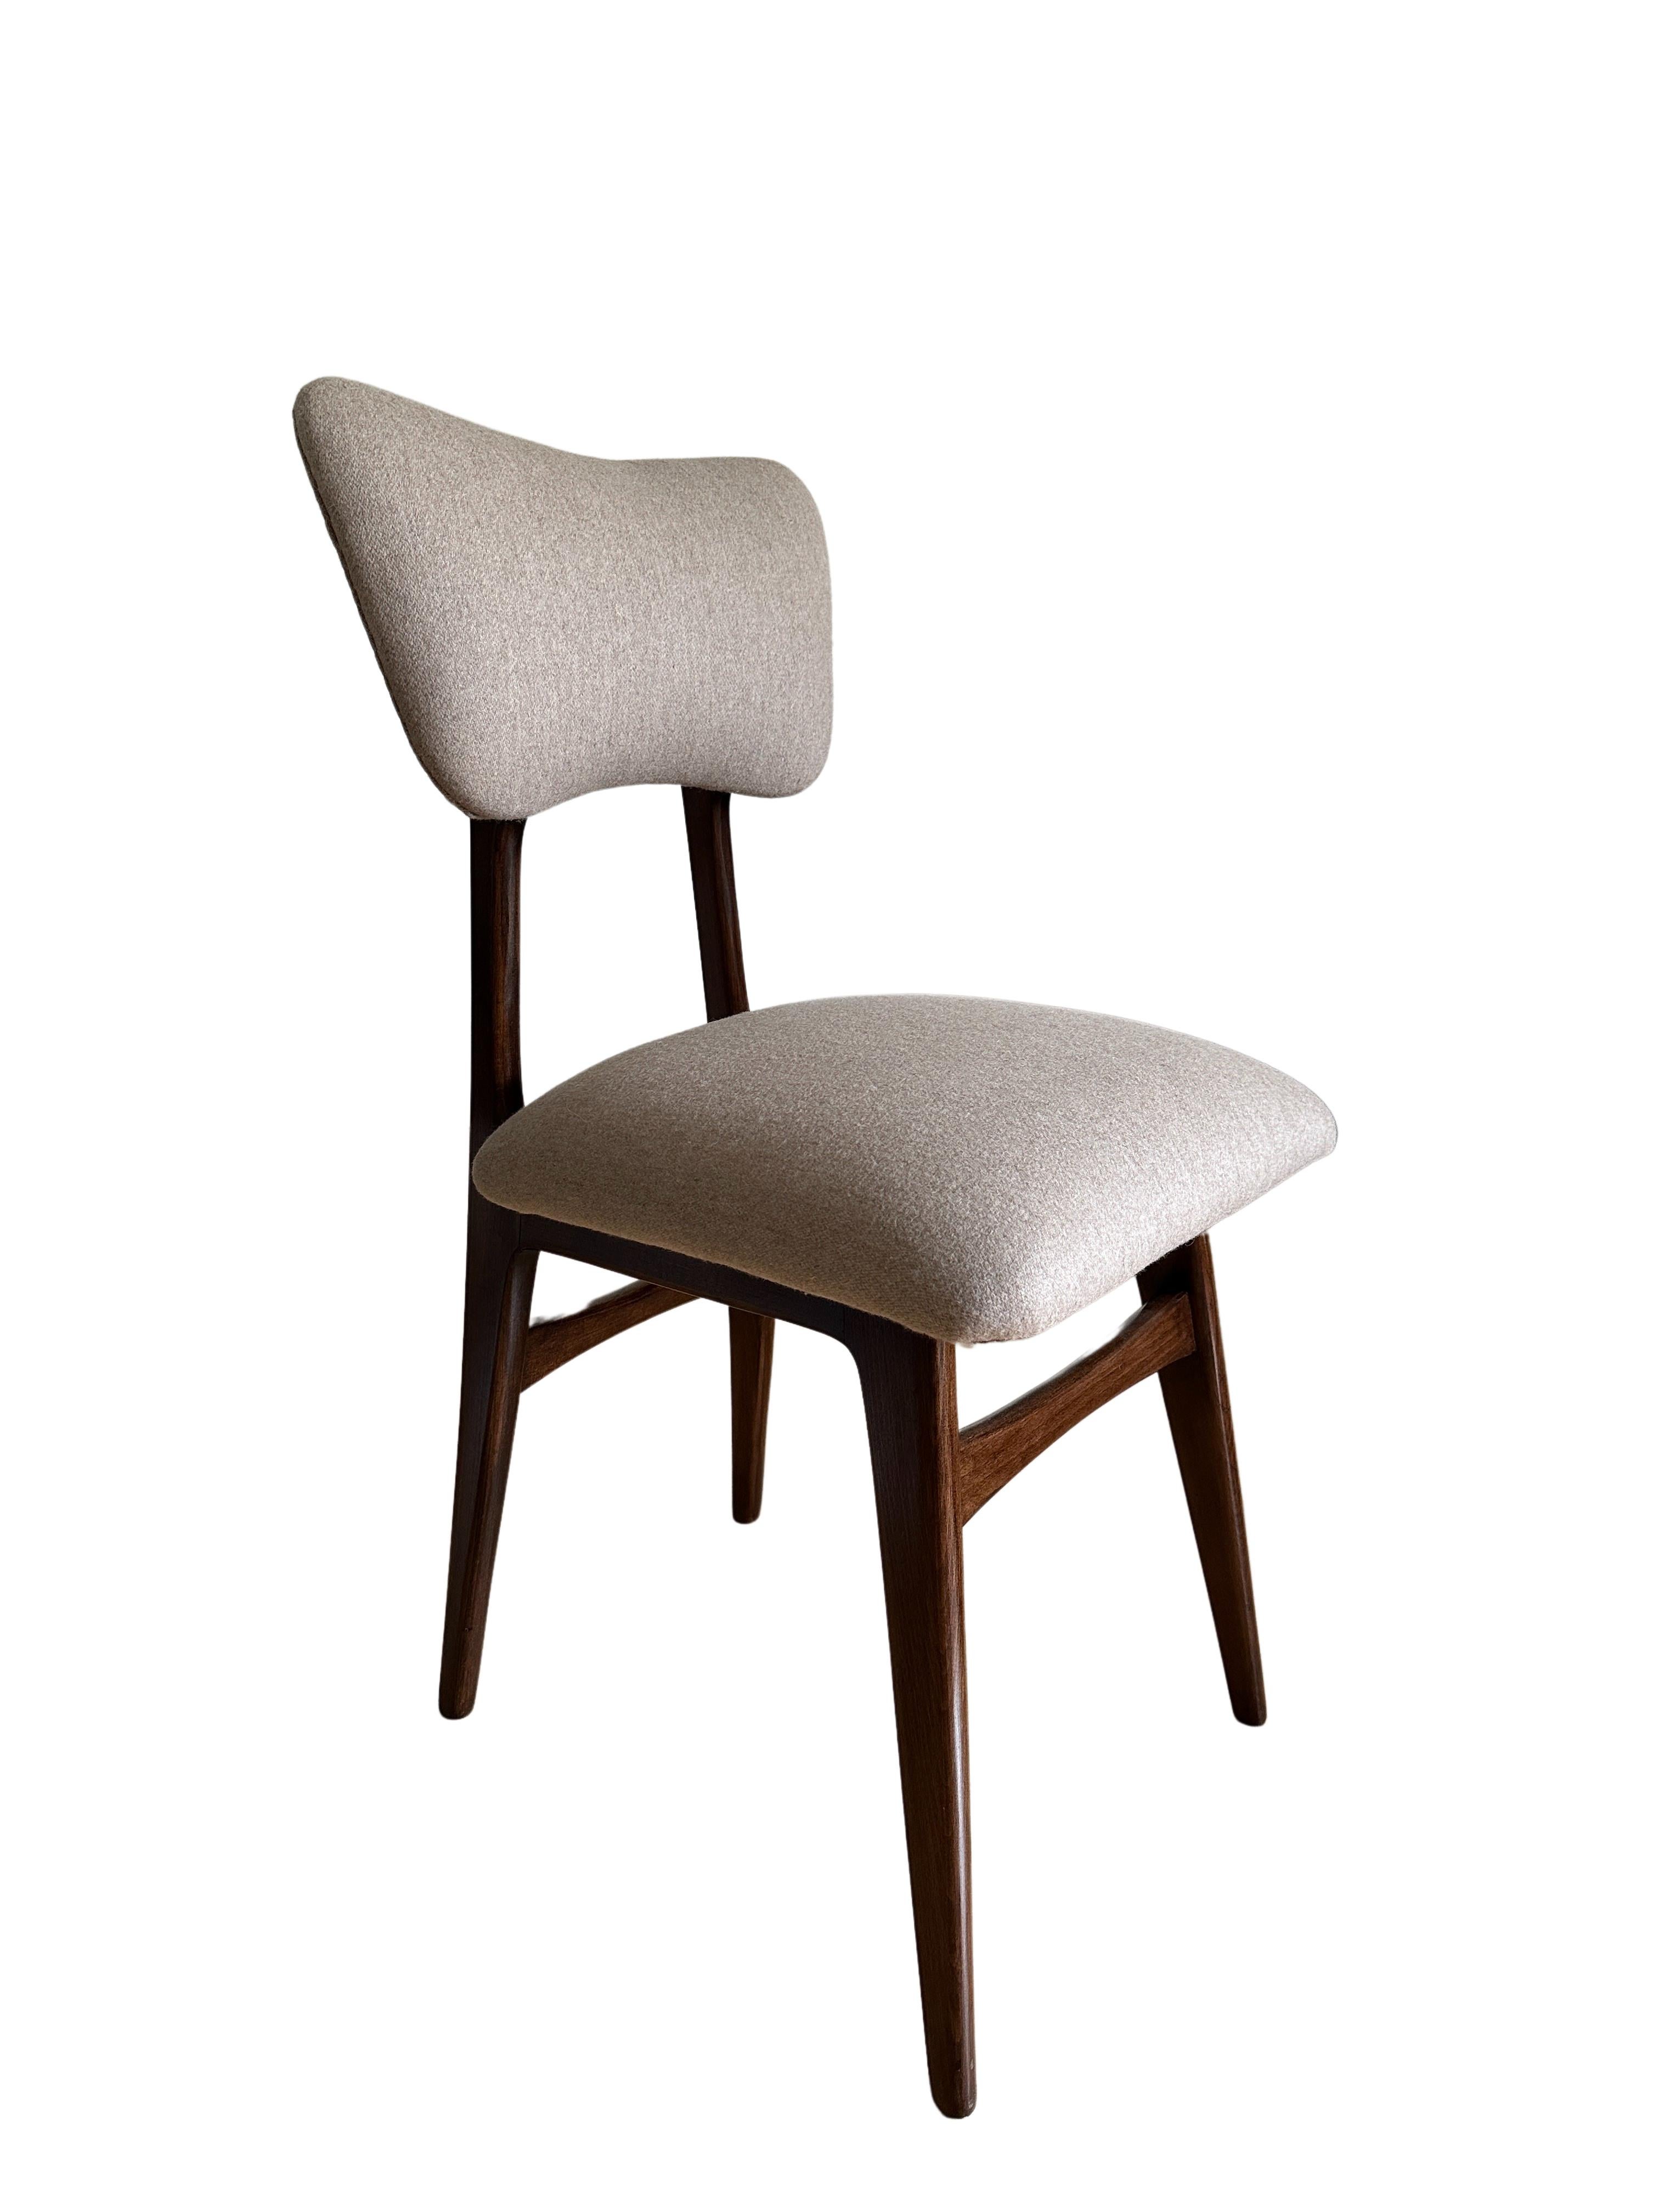 Set of 4 Midcentury Dining Chairs in Beige Wool Upholstery, Poland, 1960s For Sale 6